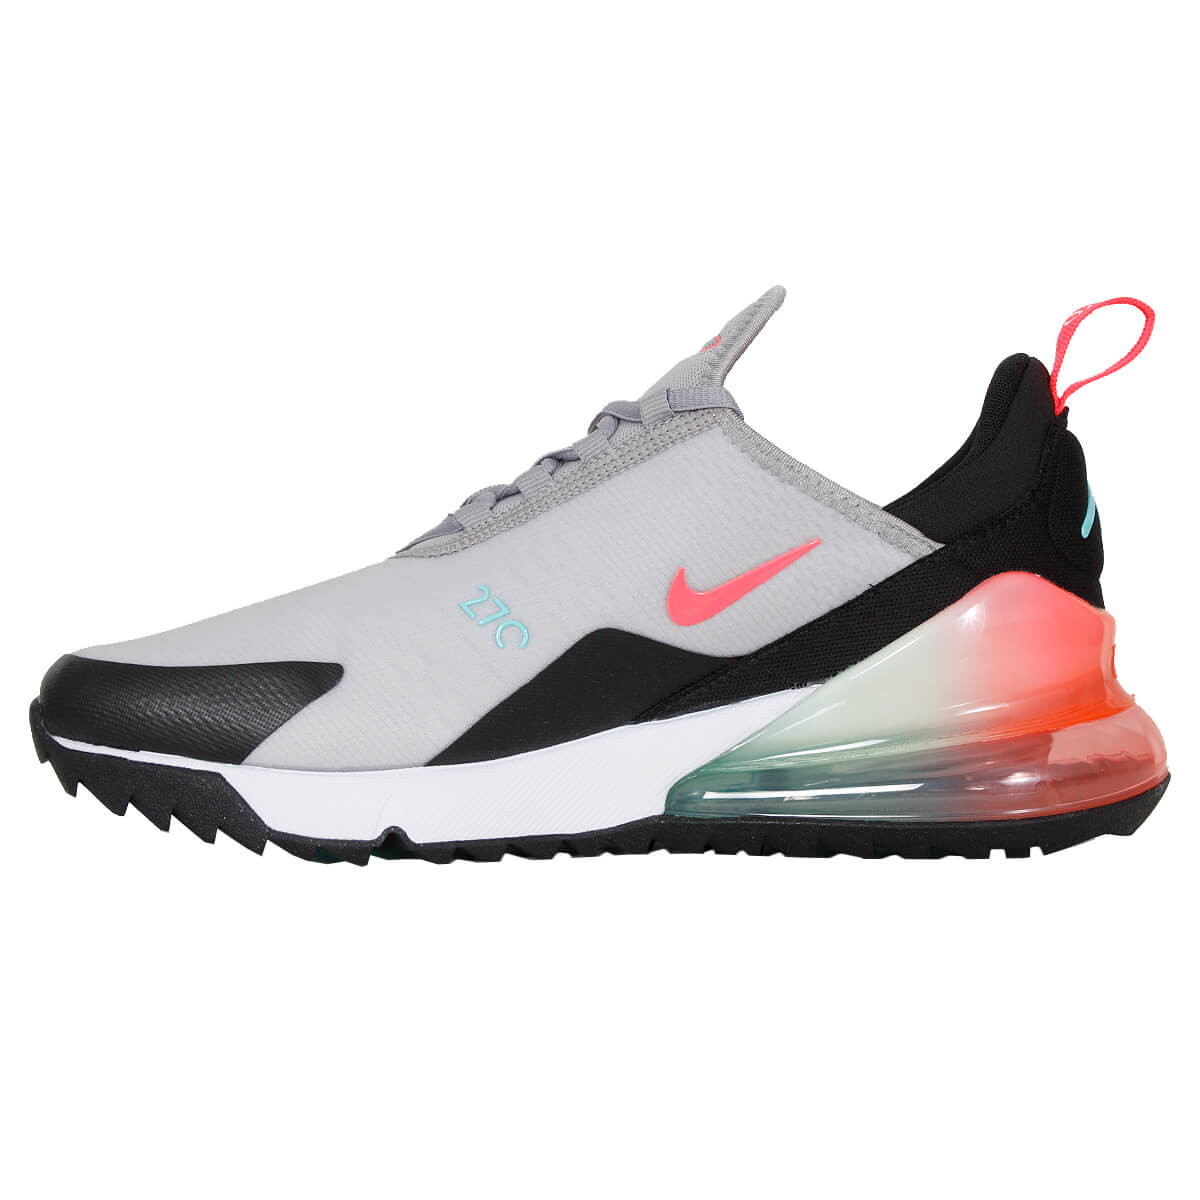 Nike Air Max 270 G Spikeless Waterproof Golf Shoes  - Atmosphere Grey/Hot Punch